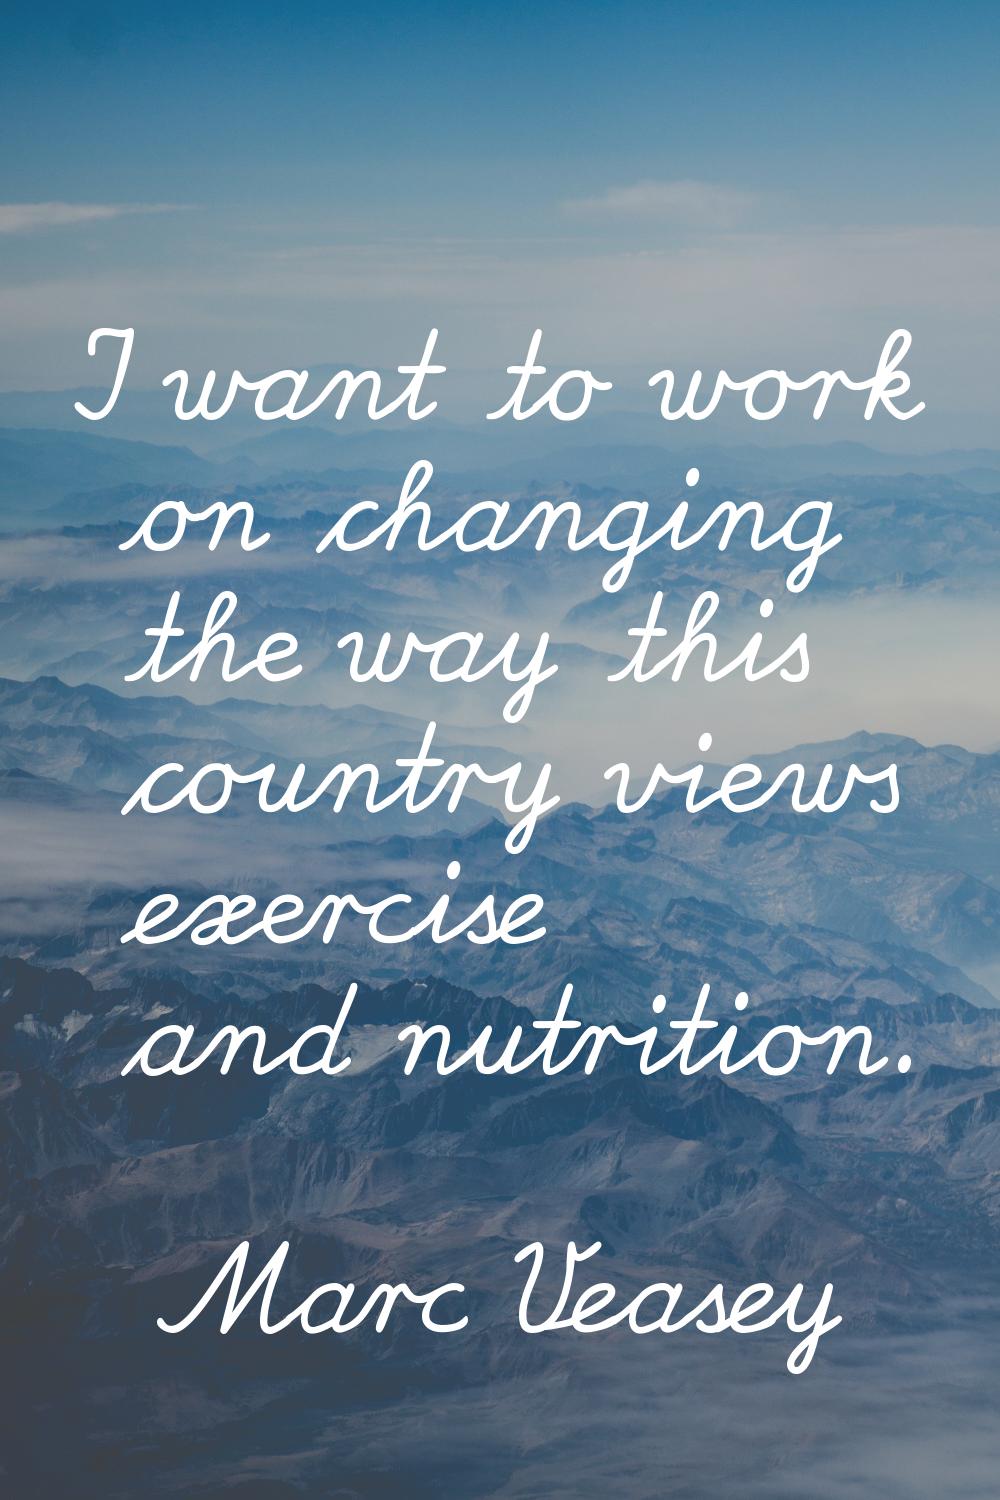 I want to work on changing the way this country views exercise and nutrition.